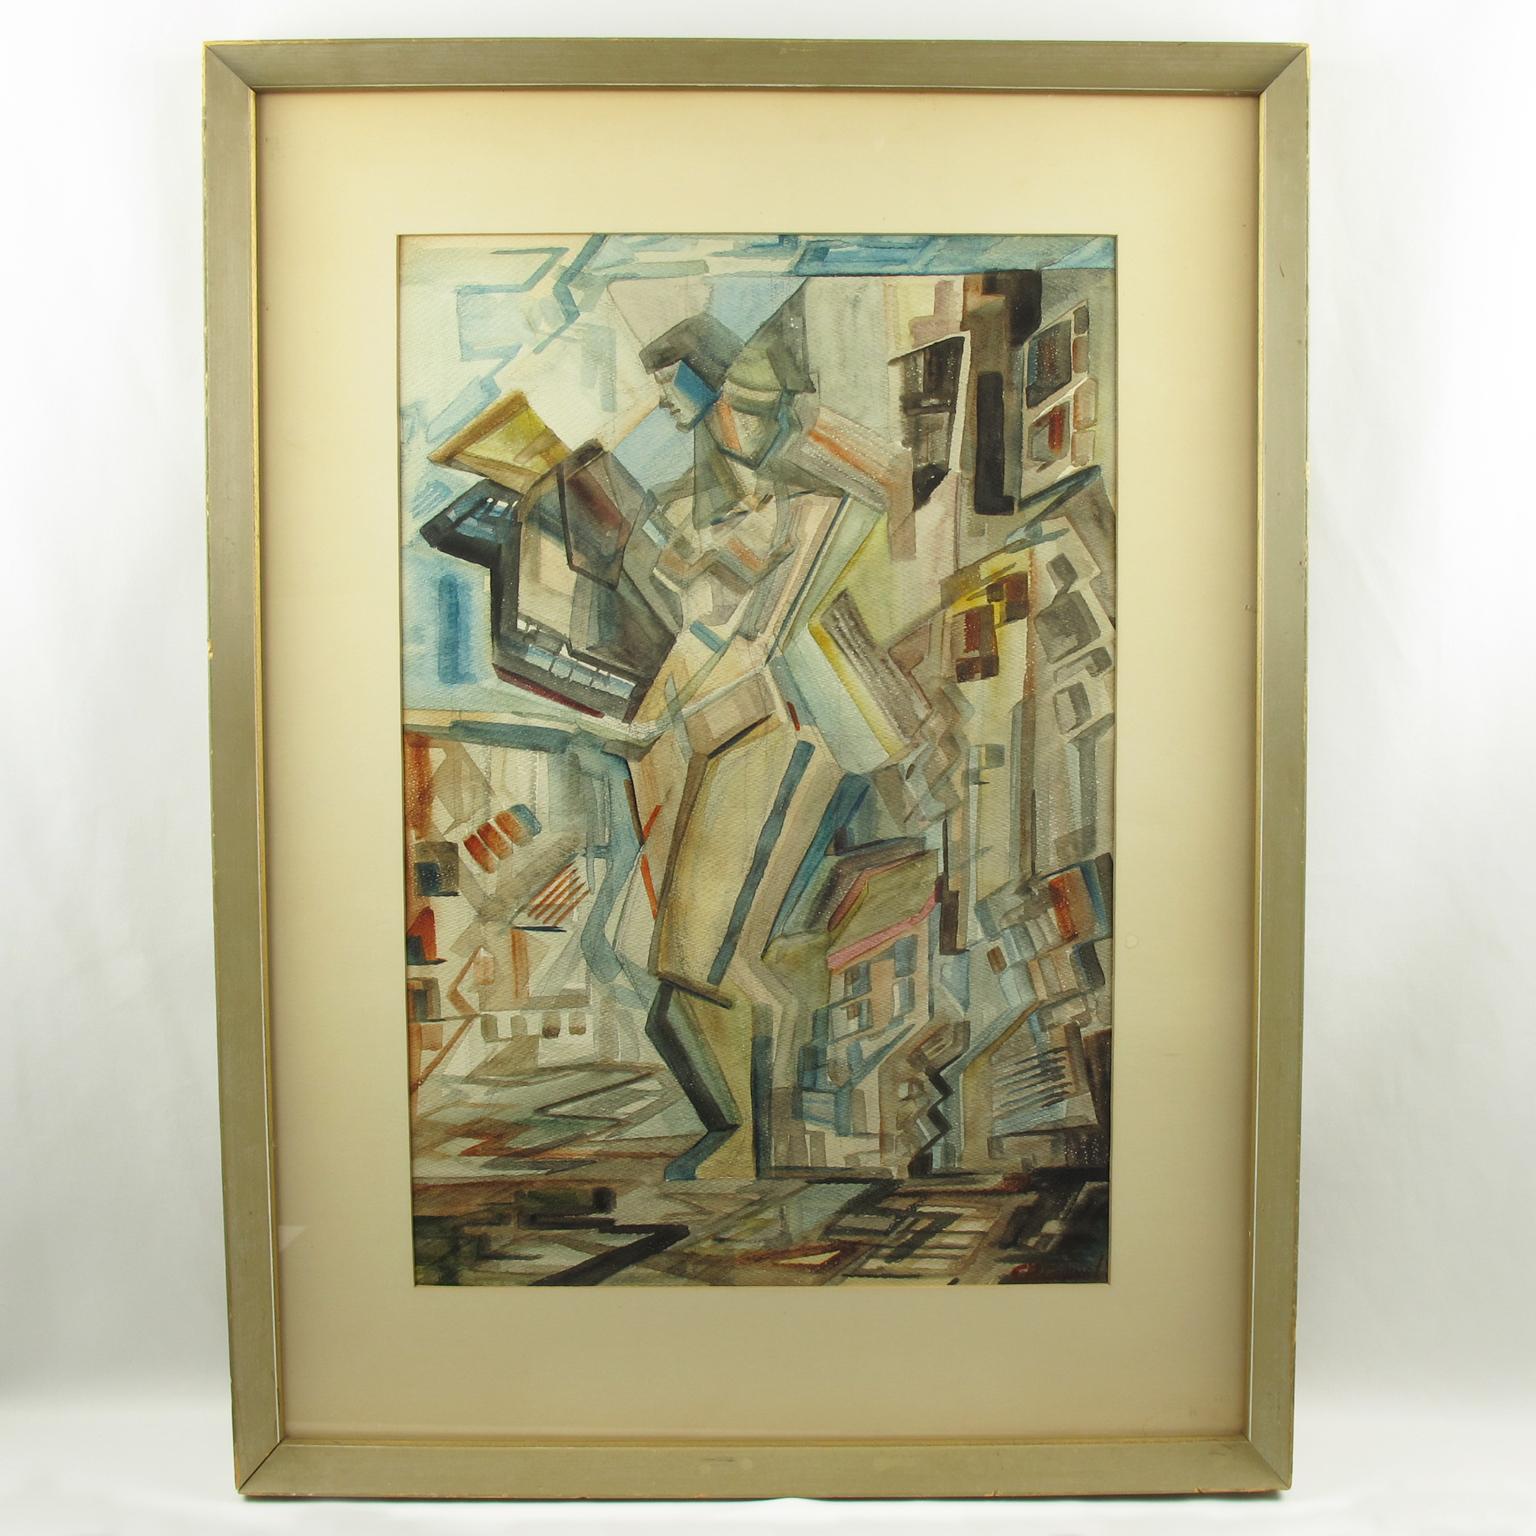 American Modernist Nude Female Cubist Watercolor Painting - Art by C. R. Gabriel